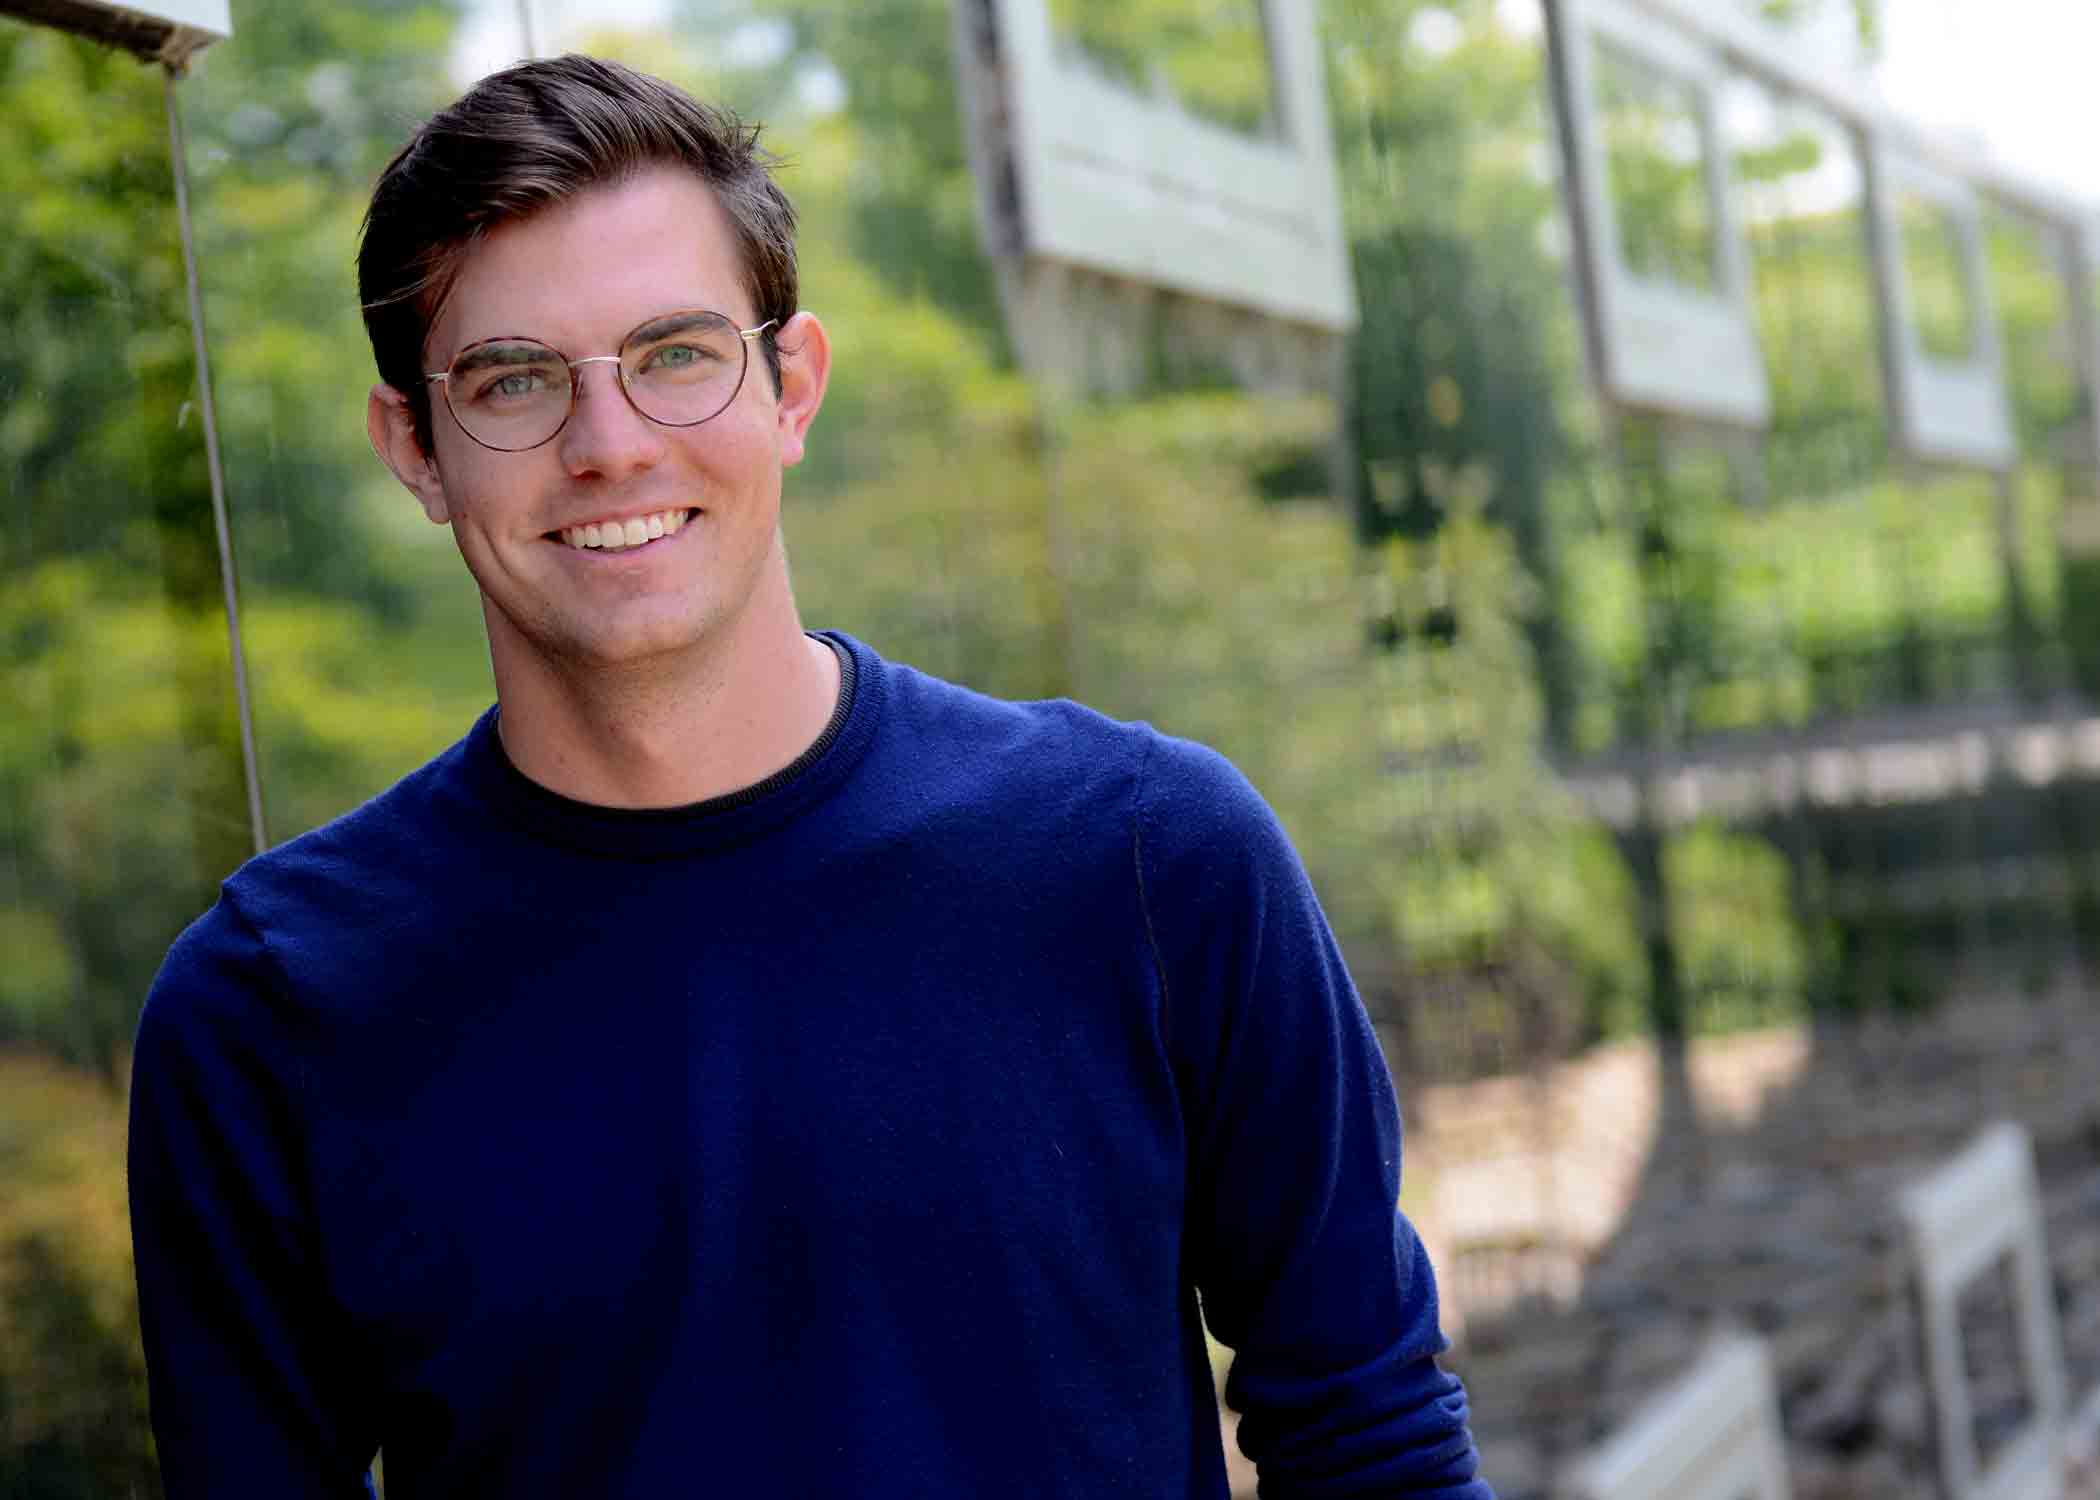 Student and soon-to-be graduate Matthew Bornhorst smiles for a professional headshot.